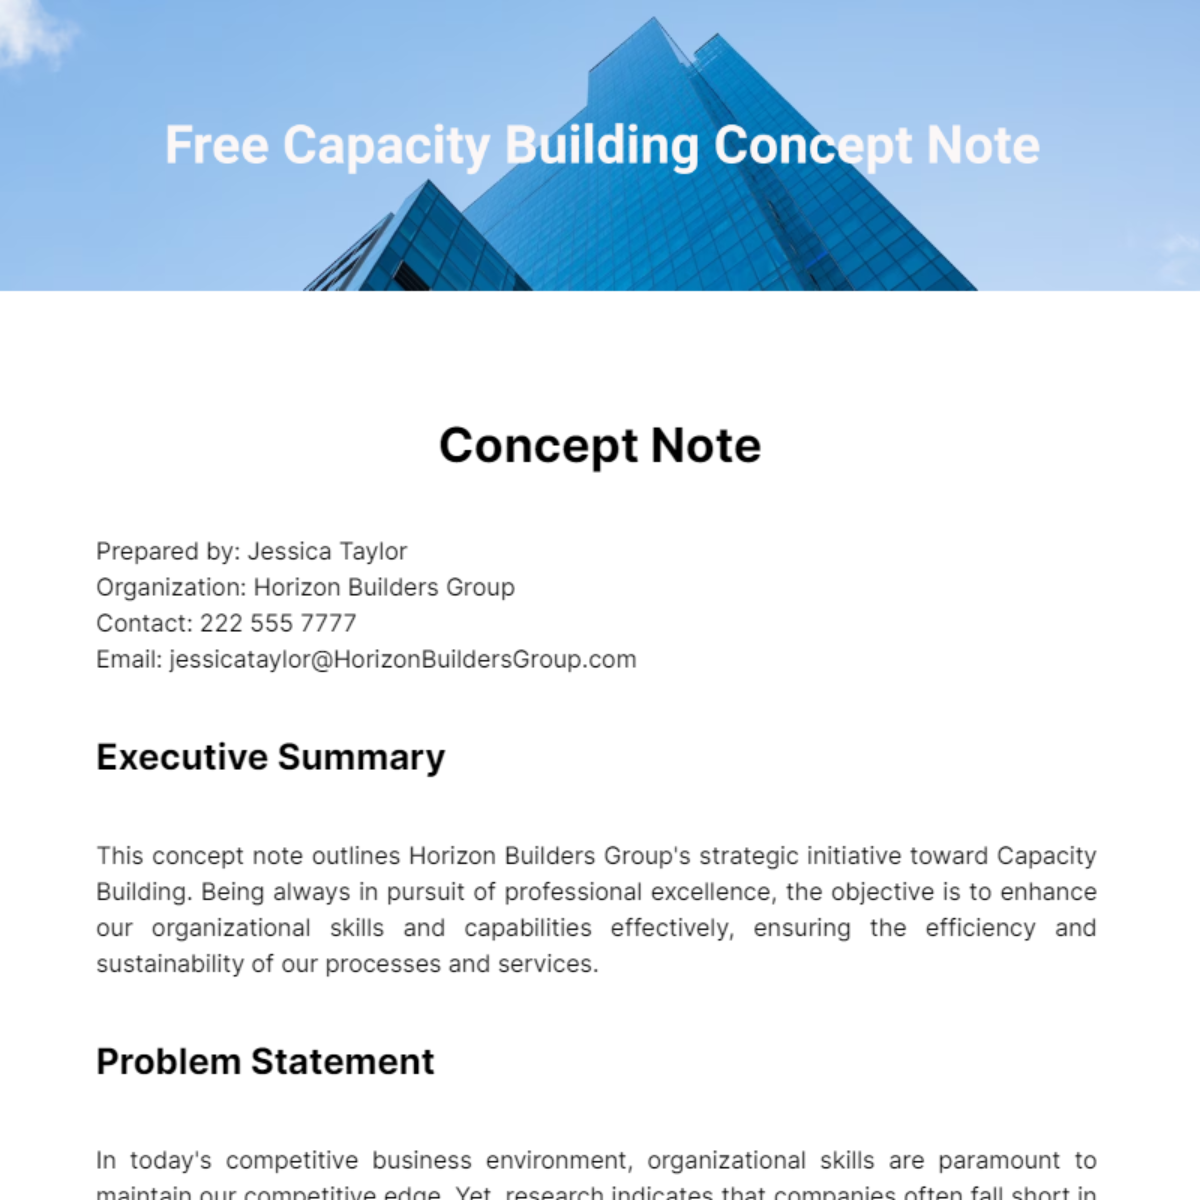 Free Capacity Building Concept Note Template